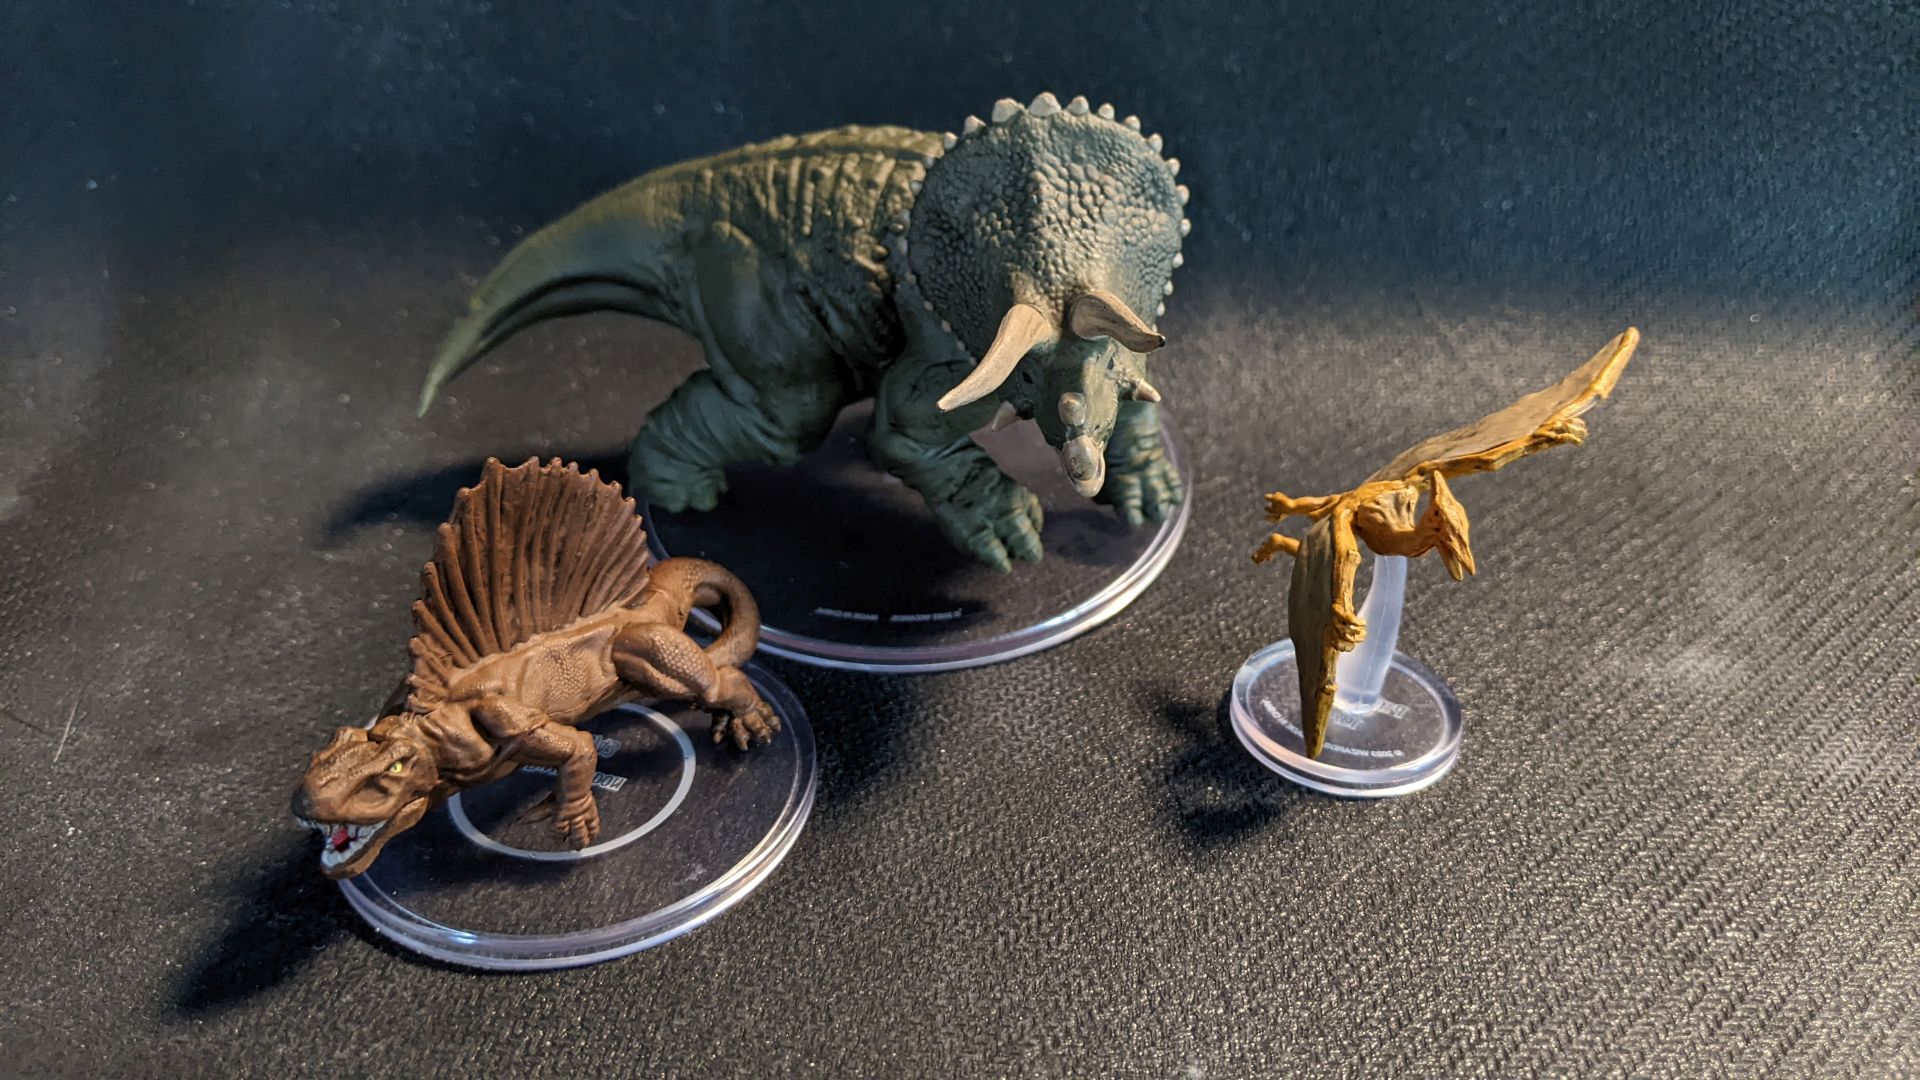 A group of dinosaurs from Wizkids Sand and Stone Blind Box